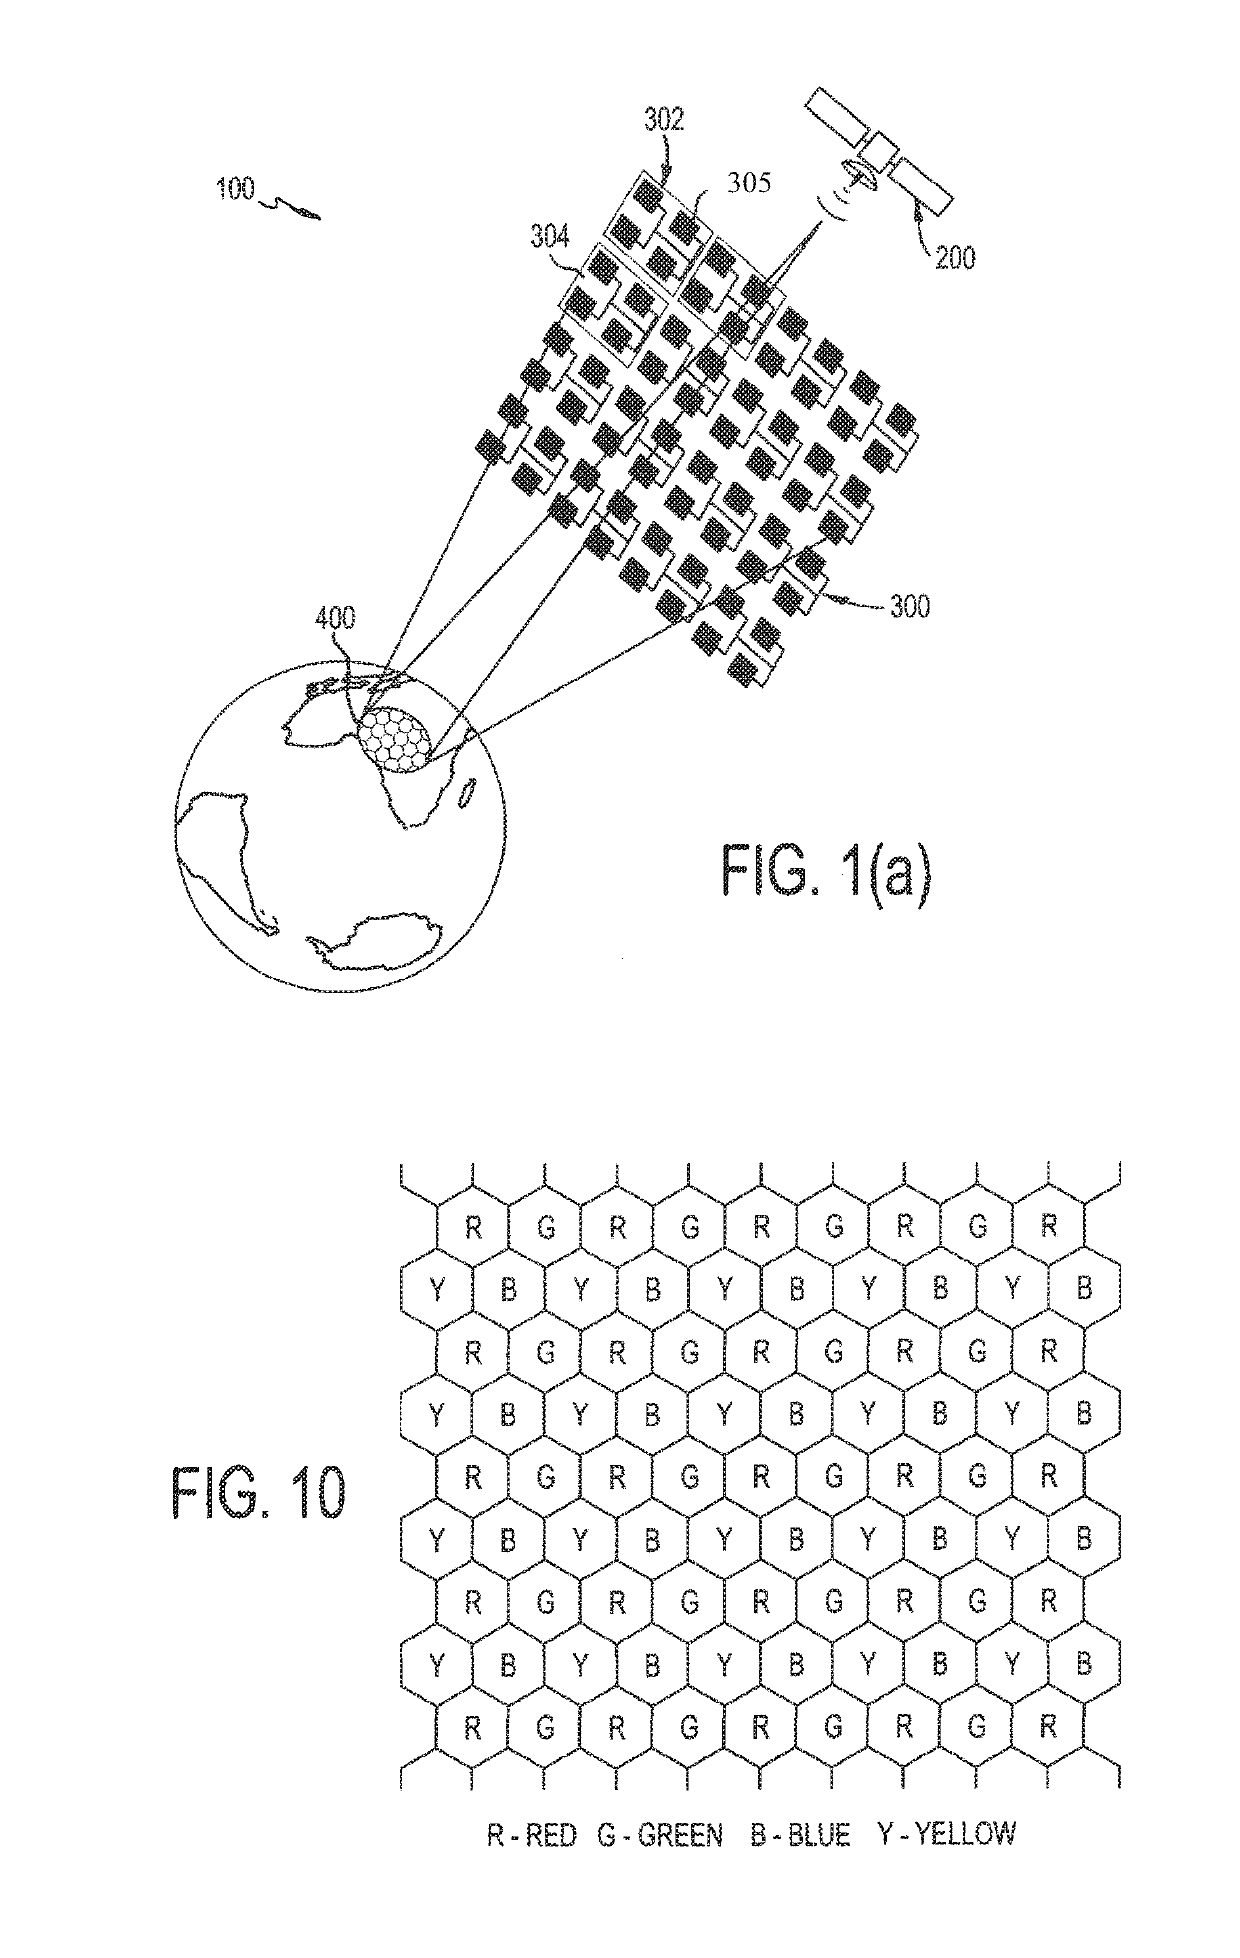 System and method for high throughput fractionated satellites (HTFS) for direct connectivity to and from end user devices and terminals using flight formations of small or very small satellites